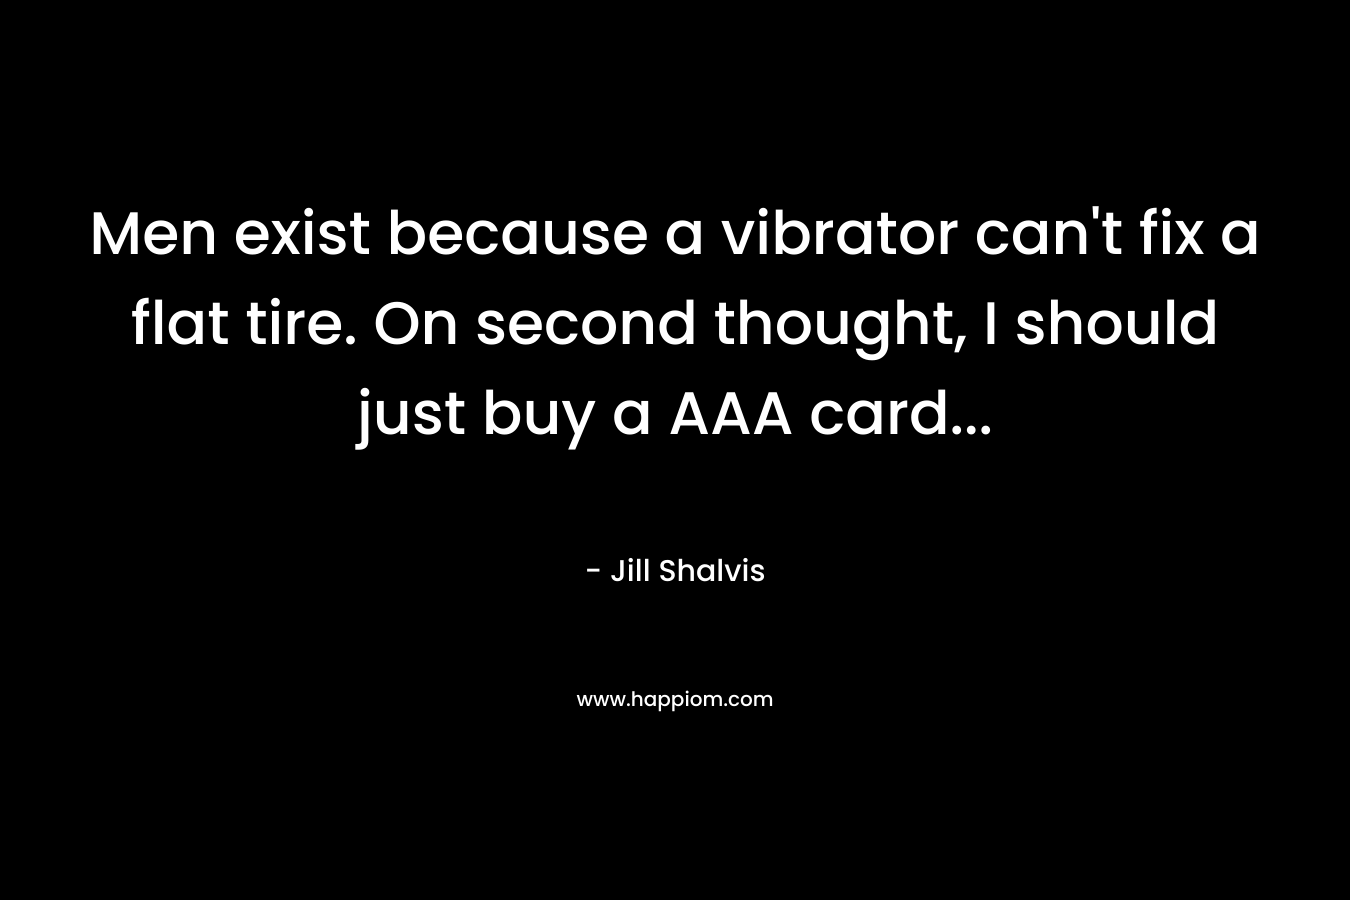 Men exist because a vibrator can’t fix a flat tire. On second thought, I should just buy a AAA card… – Jill Shalvis